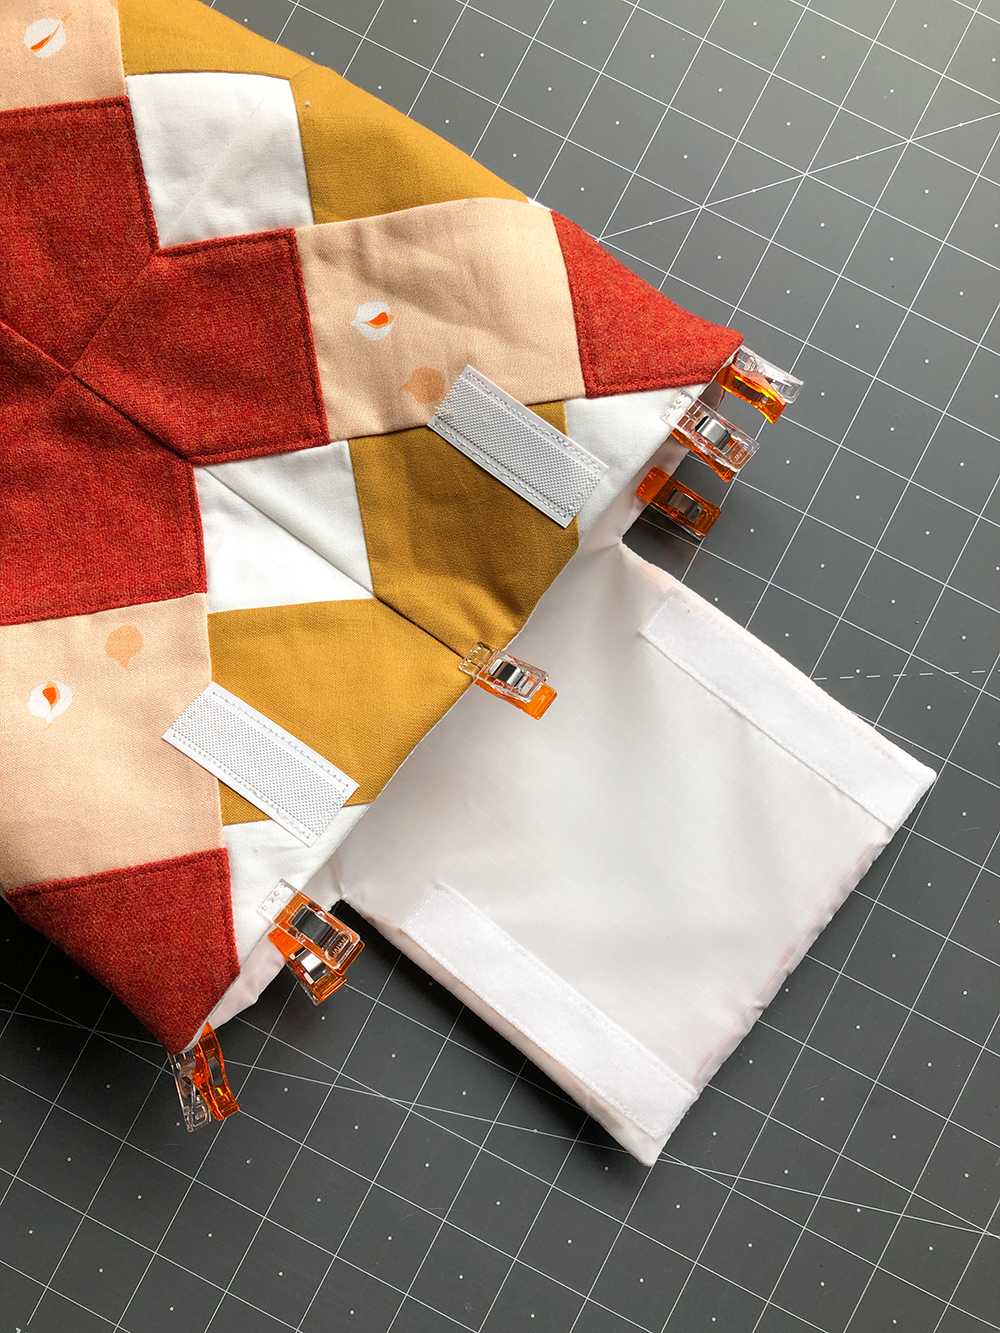 A step by step photo tutorial with all the information you need to make a quilted lunch bag with the Suzy Quilts Kris Kross pattern. Read about materials you'll need, how to use the Kris Kross pattern, and see every step for making your own quilted lunch bag. suzyquilts.com #quilting #sewingdiy